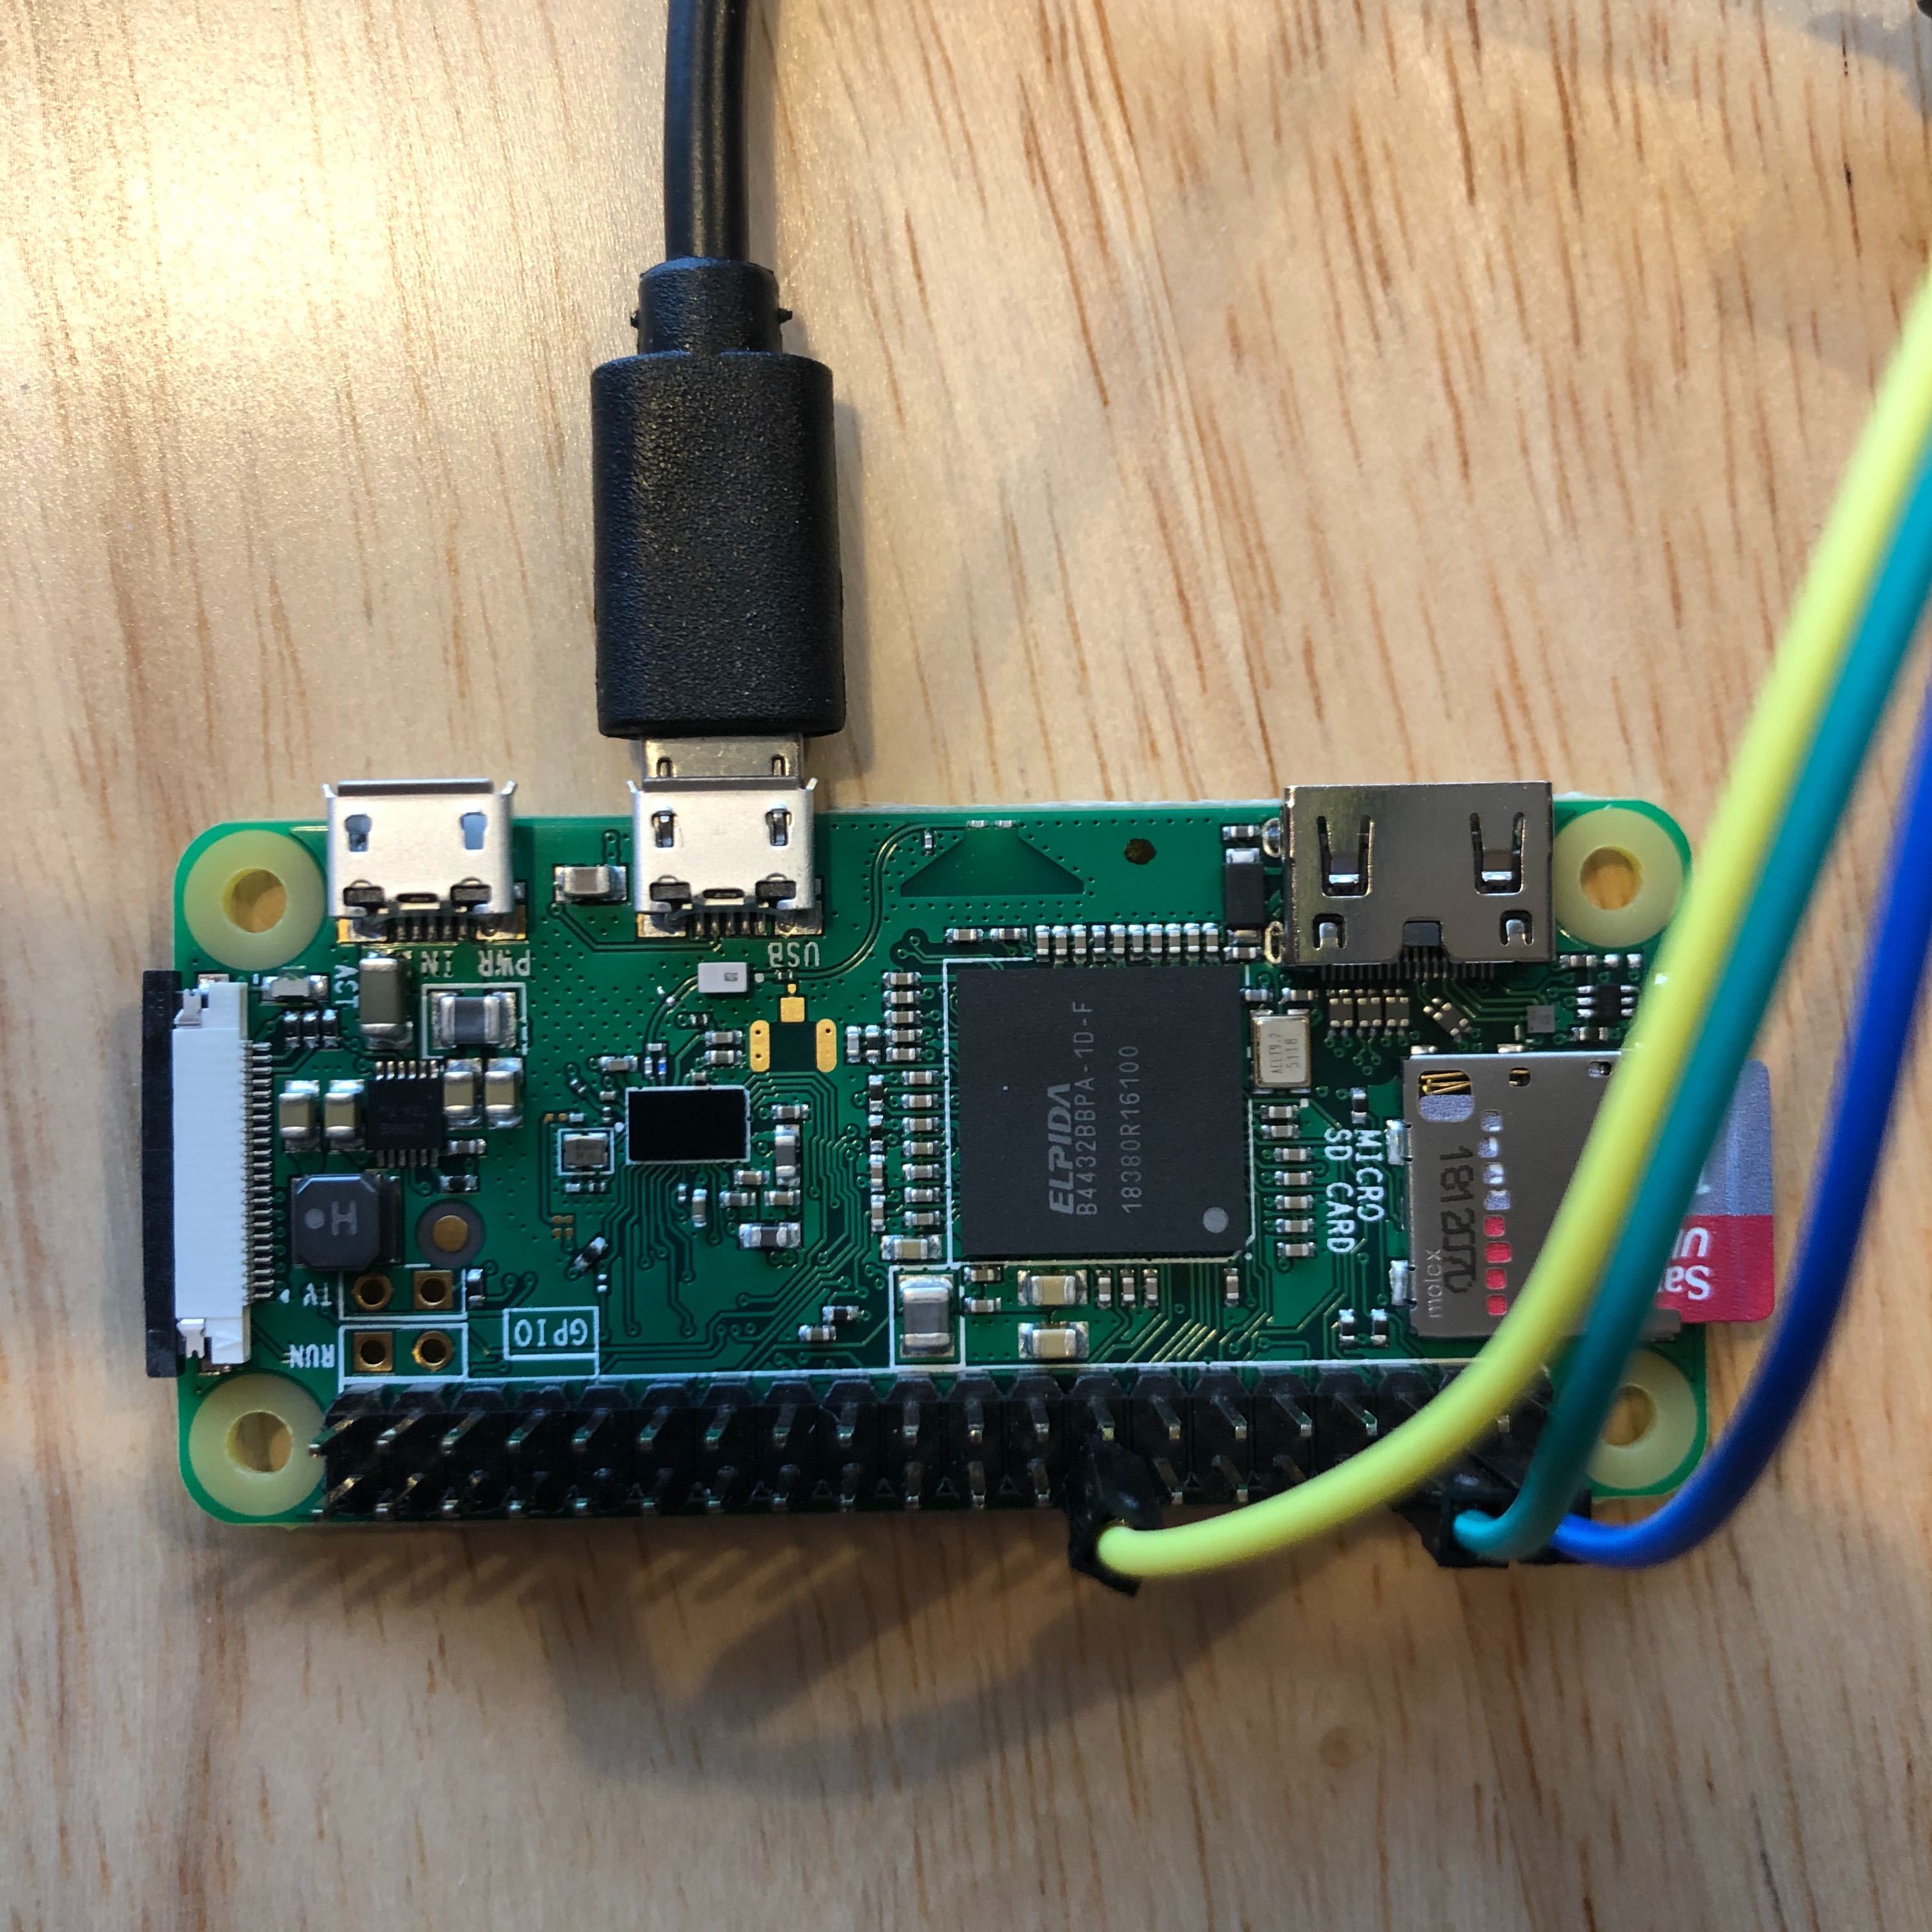 How to connect to your Pi